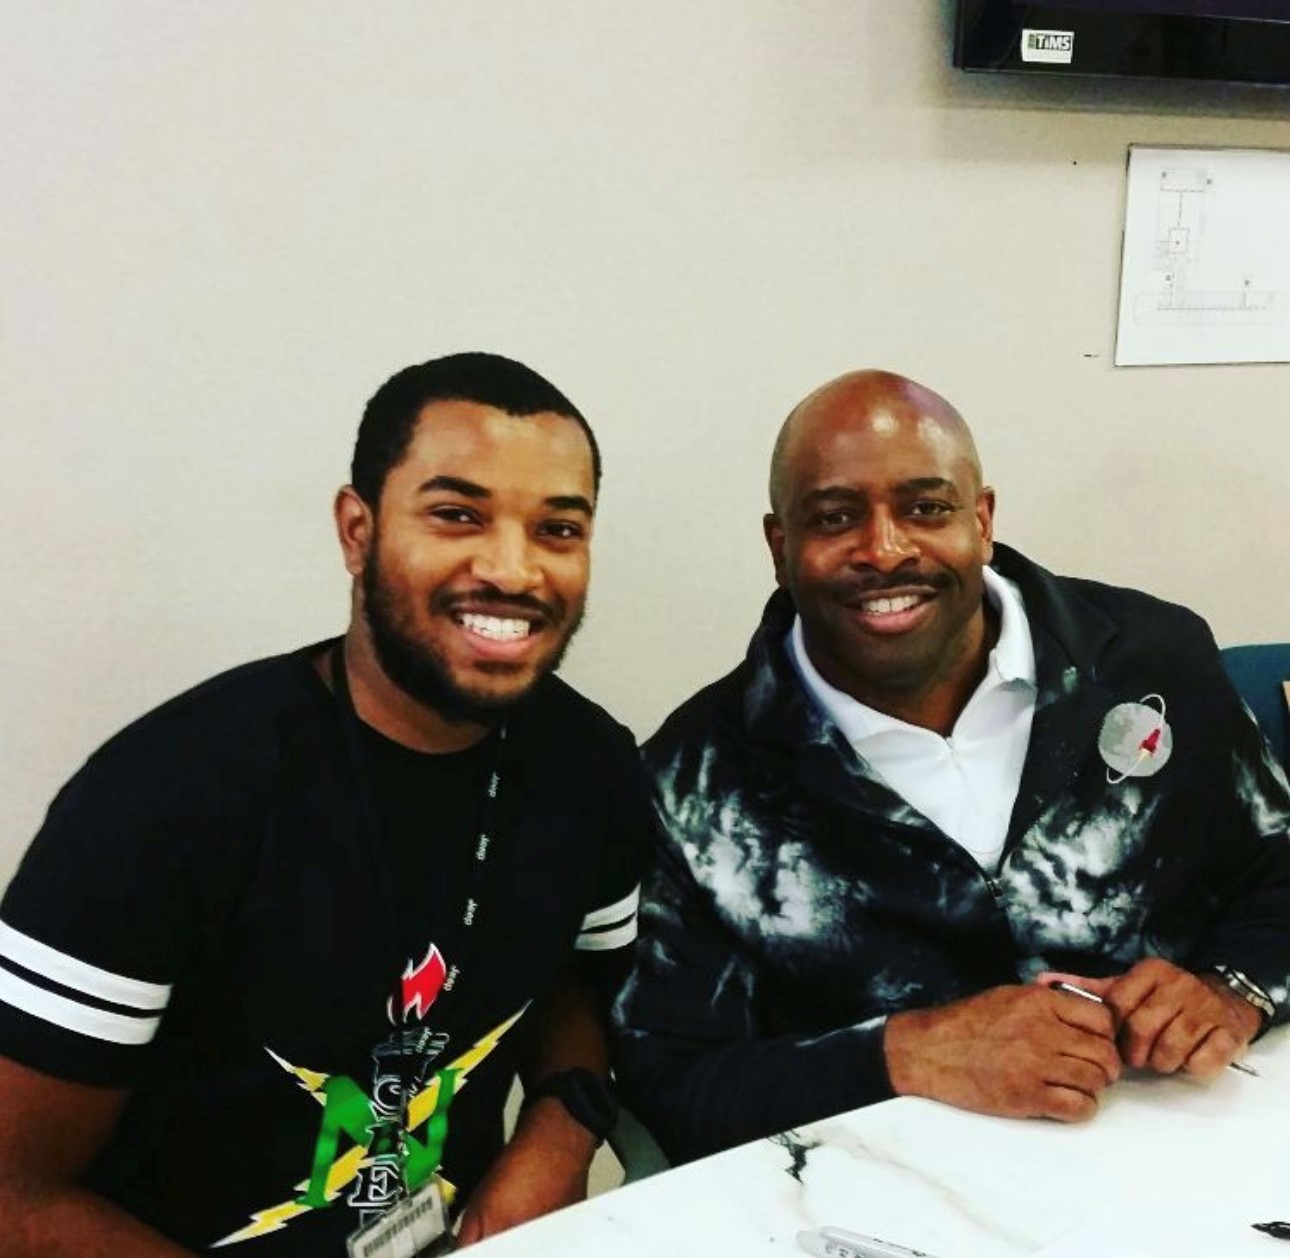 Two men sitting at a table smile at the camera in an informal snapshot. The younger man on the left wears an honor society T-shirt. The older man on the right wears a jacket with an orbiting rocket logo.